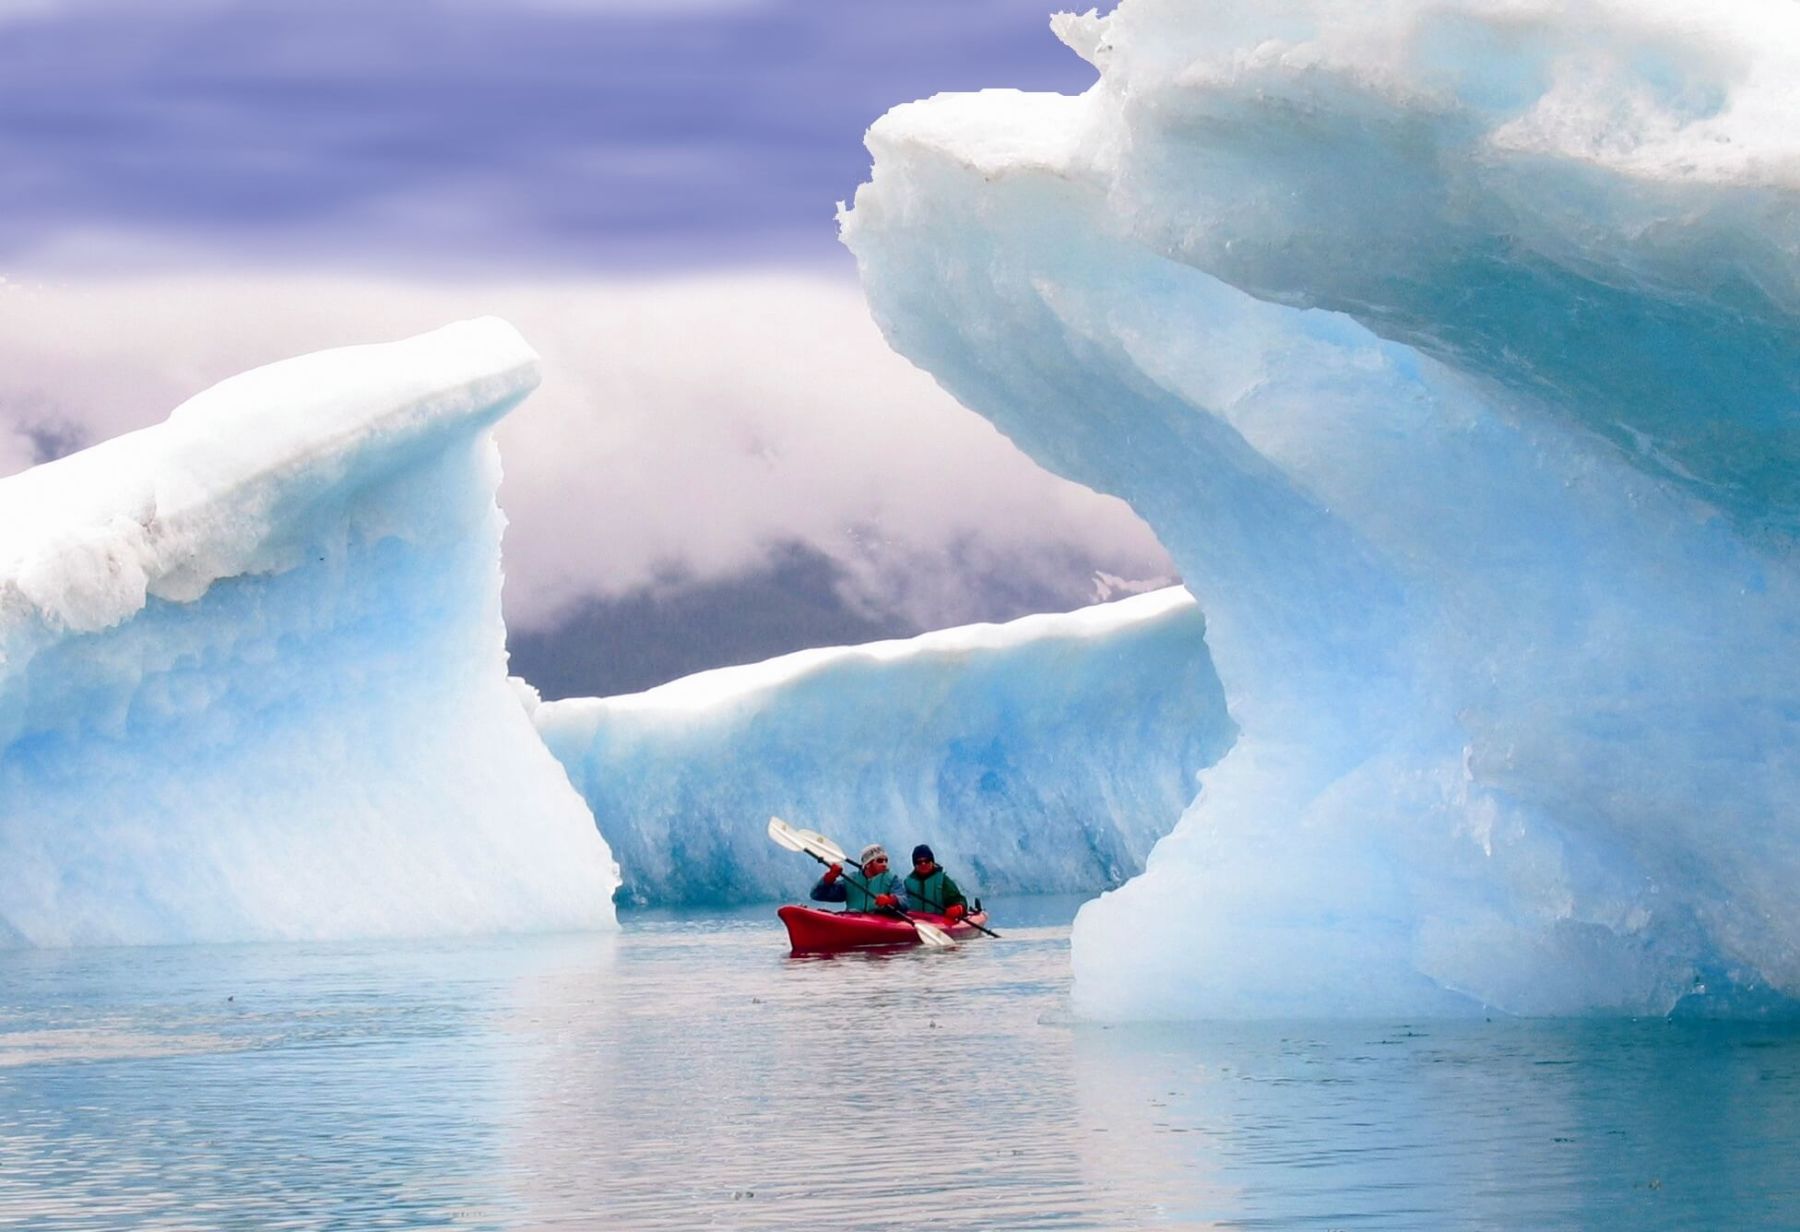 Frozen Fjords and Wild Rivers: A Guide to Kayaking in Alaska